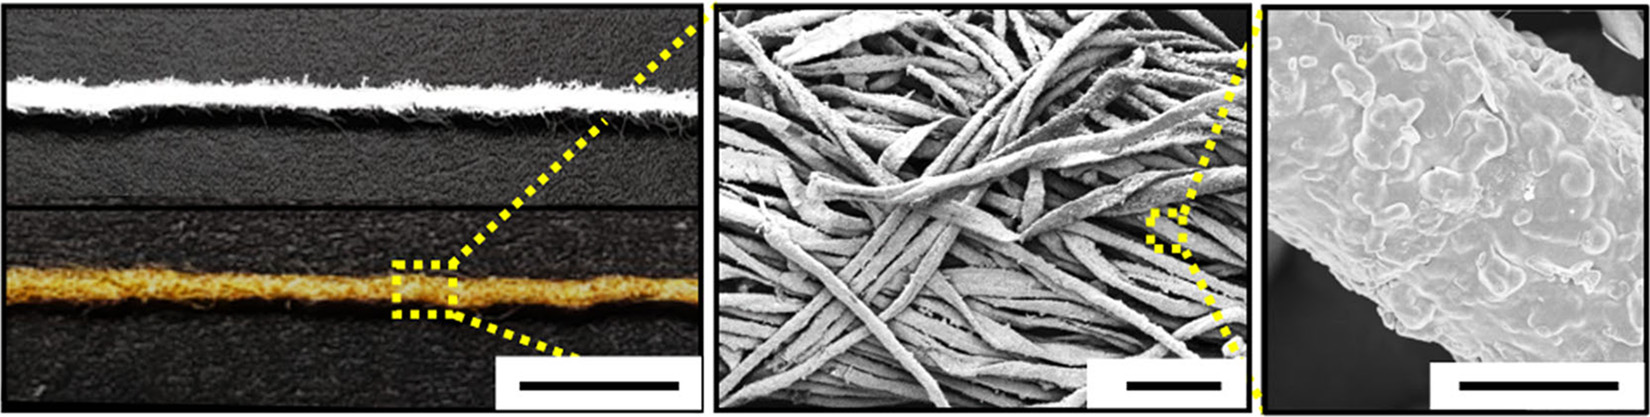 Image shows plain cotton fibers and metallic cotton fibers used as electrodes in a new biofuel cell. (Credit: Georgia Tech/Korea University)